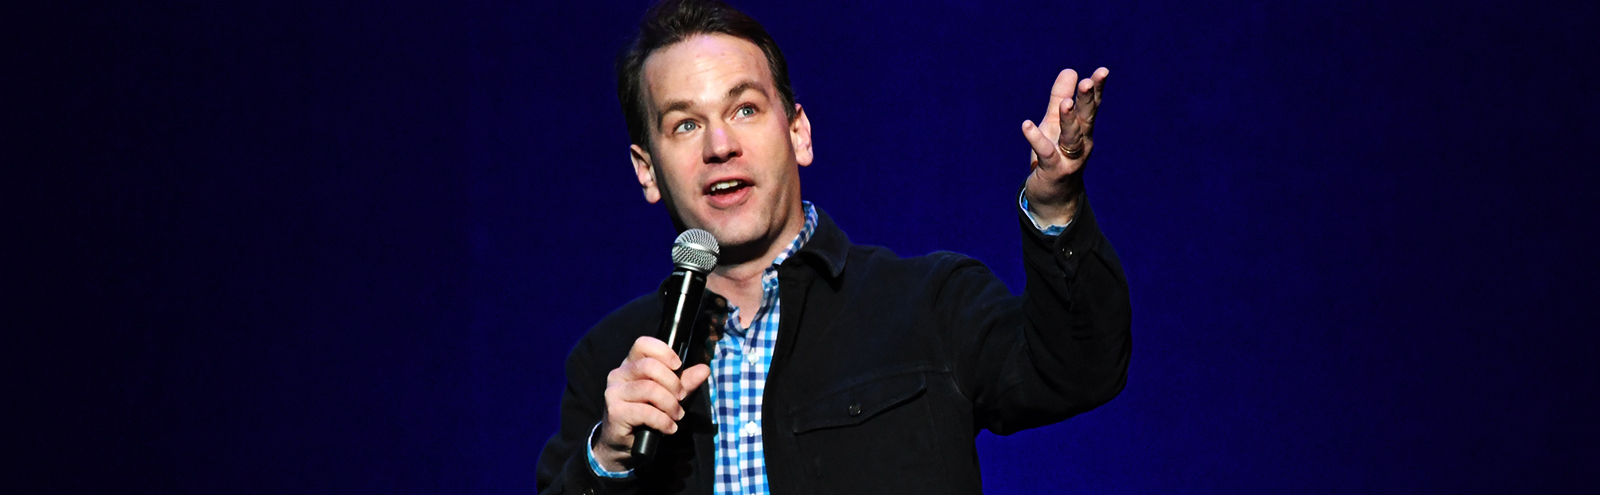 Mike Birbiglia Interview: On Comedy And Finding Beauty In 2020